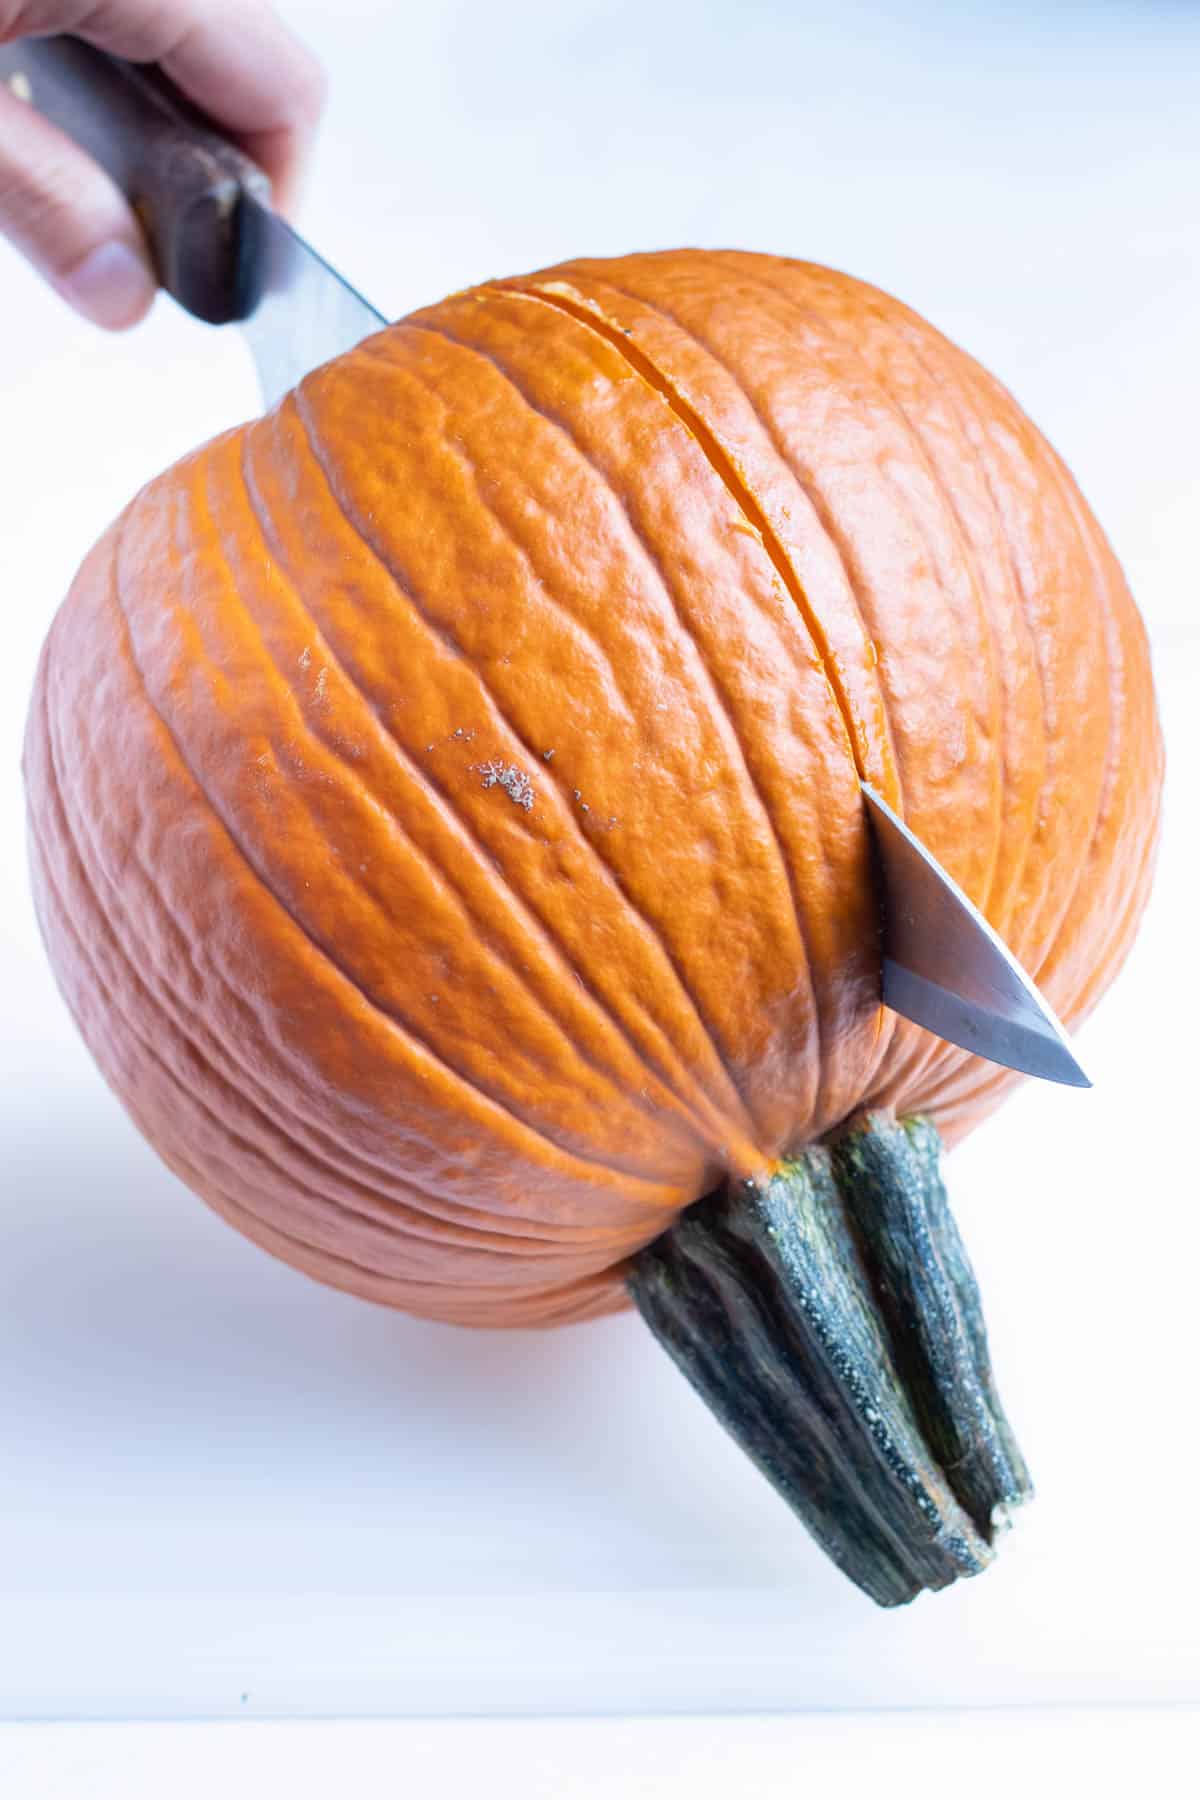 Pumpkin is cut in half with a large knife.